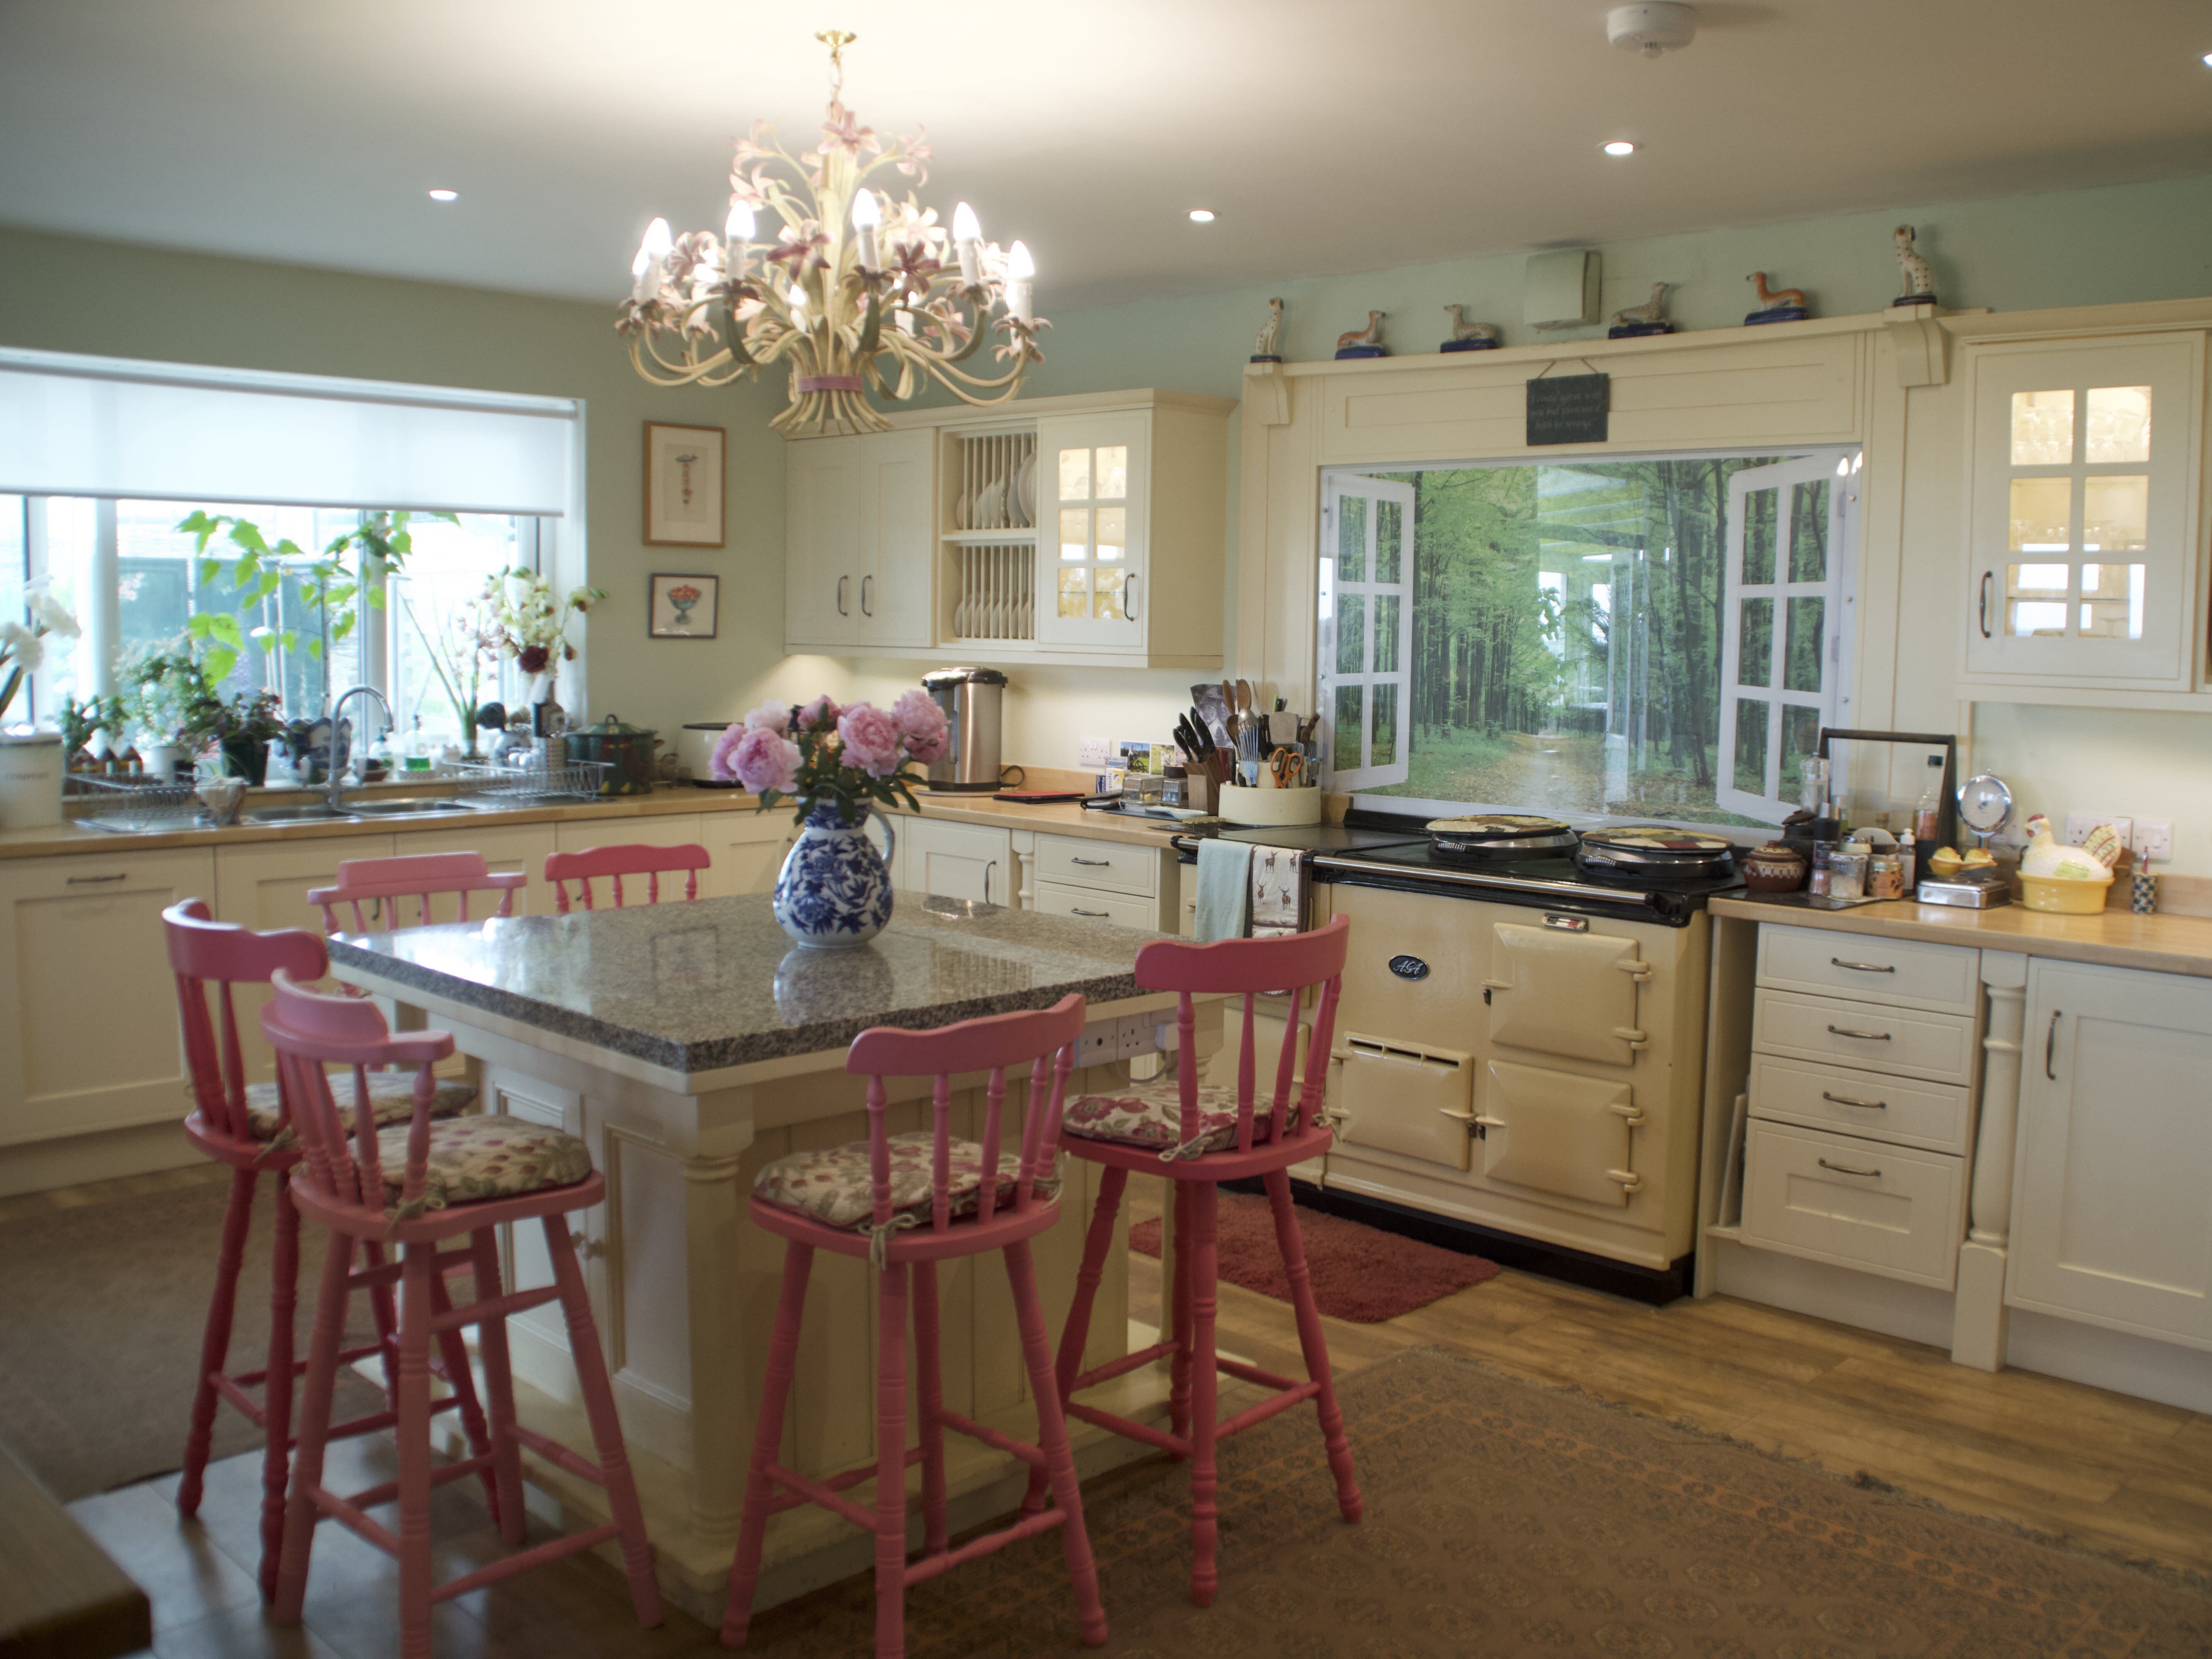 Large kitchen with an island for seating, moorland landscape in the background